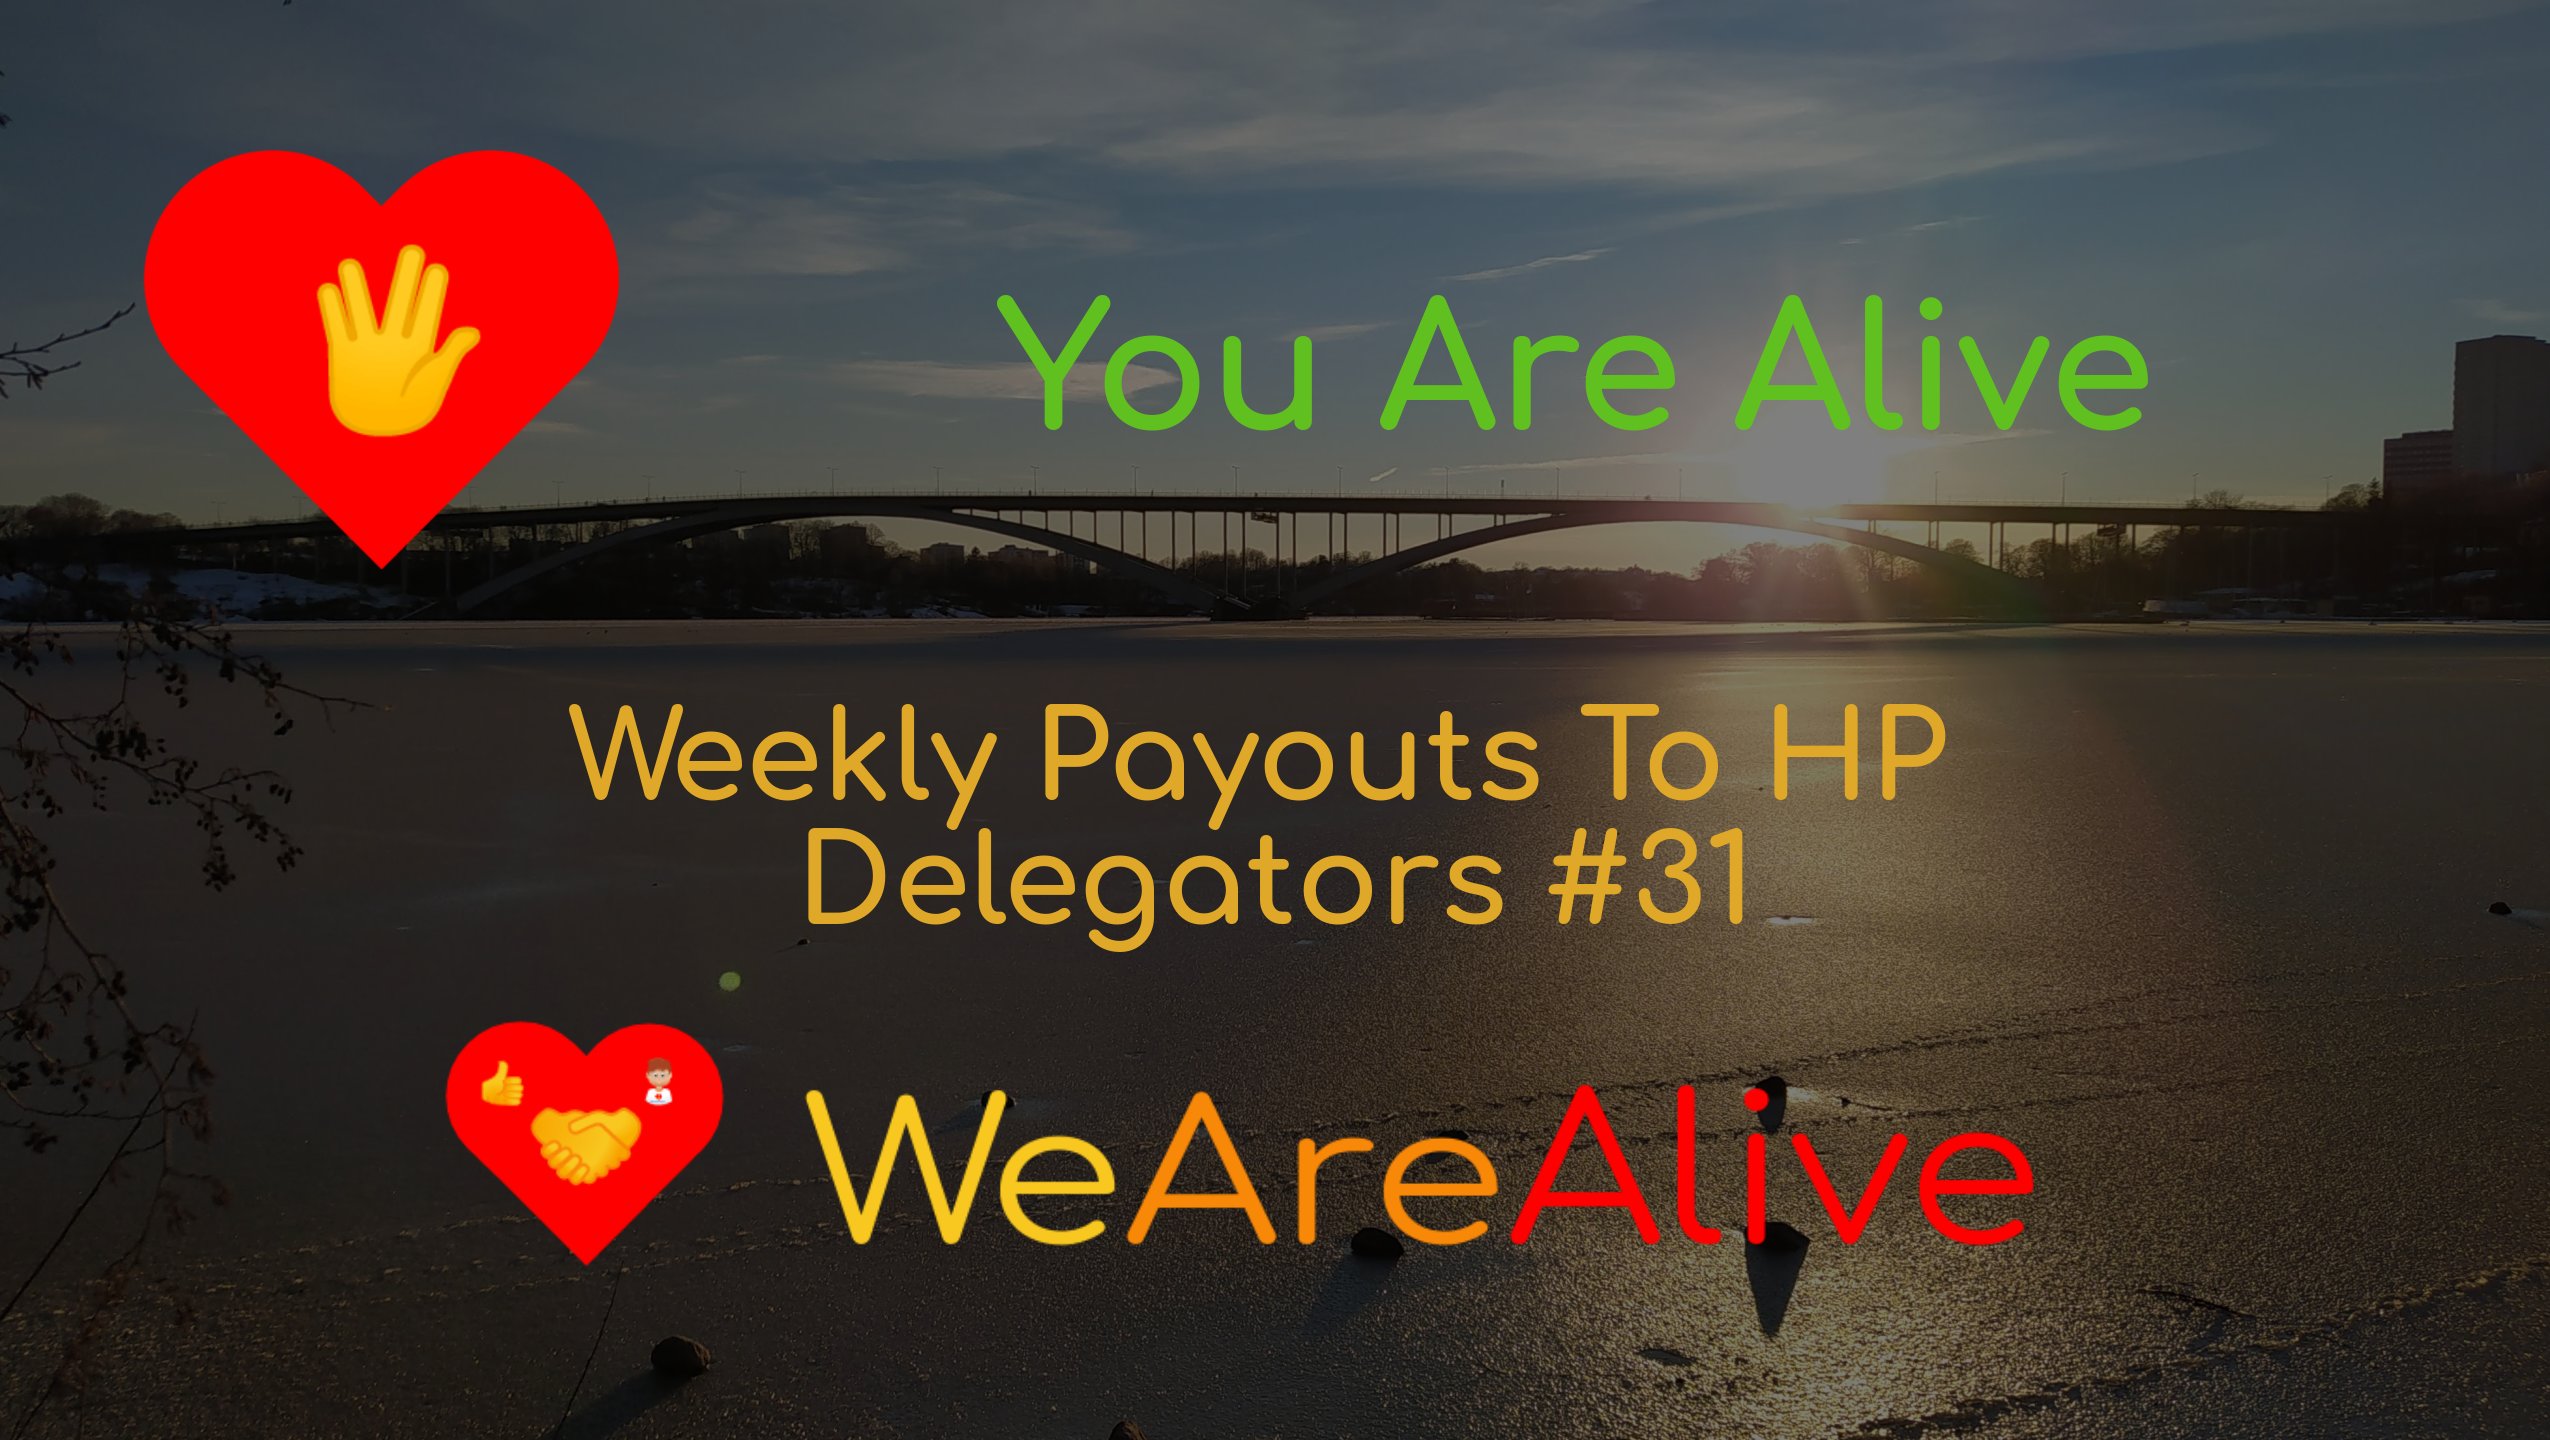 @youarealive/you-are-alive-weekly-payouts-to-hp-delegators-31